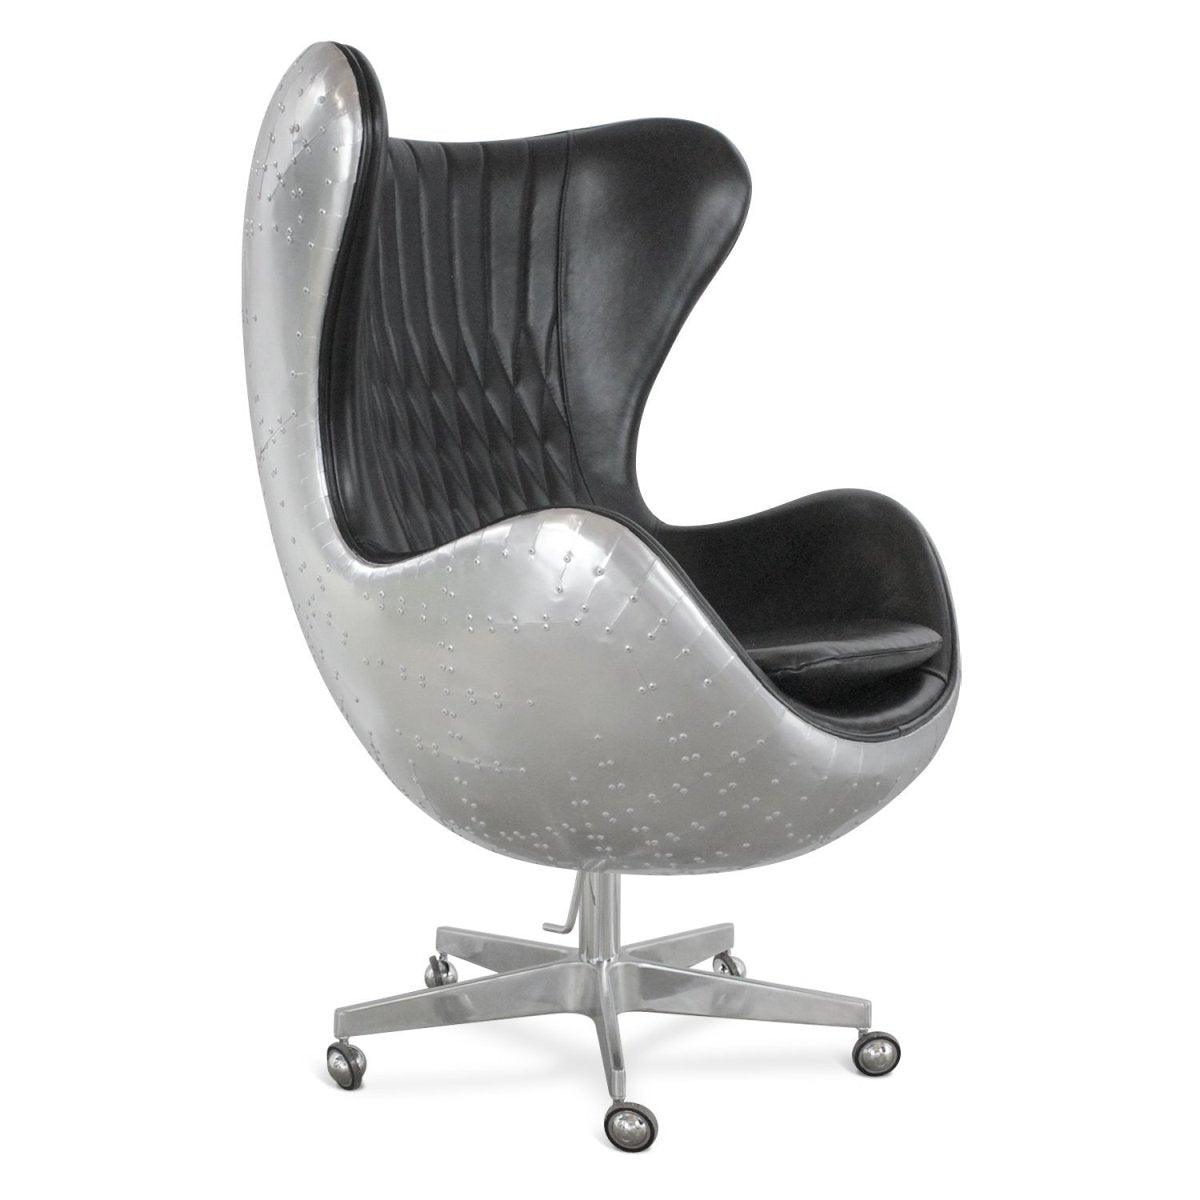 Chair CHAIR ONE 4STAR - on 4 <a href='/swivel-casters/'>Swivel Casters</a> By Magis | Restylit Shop - Dreamy Interiors